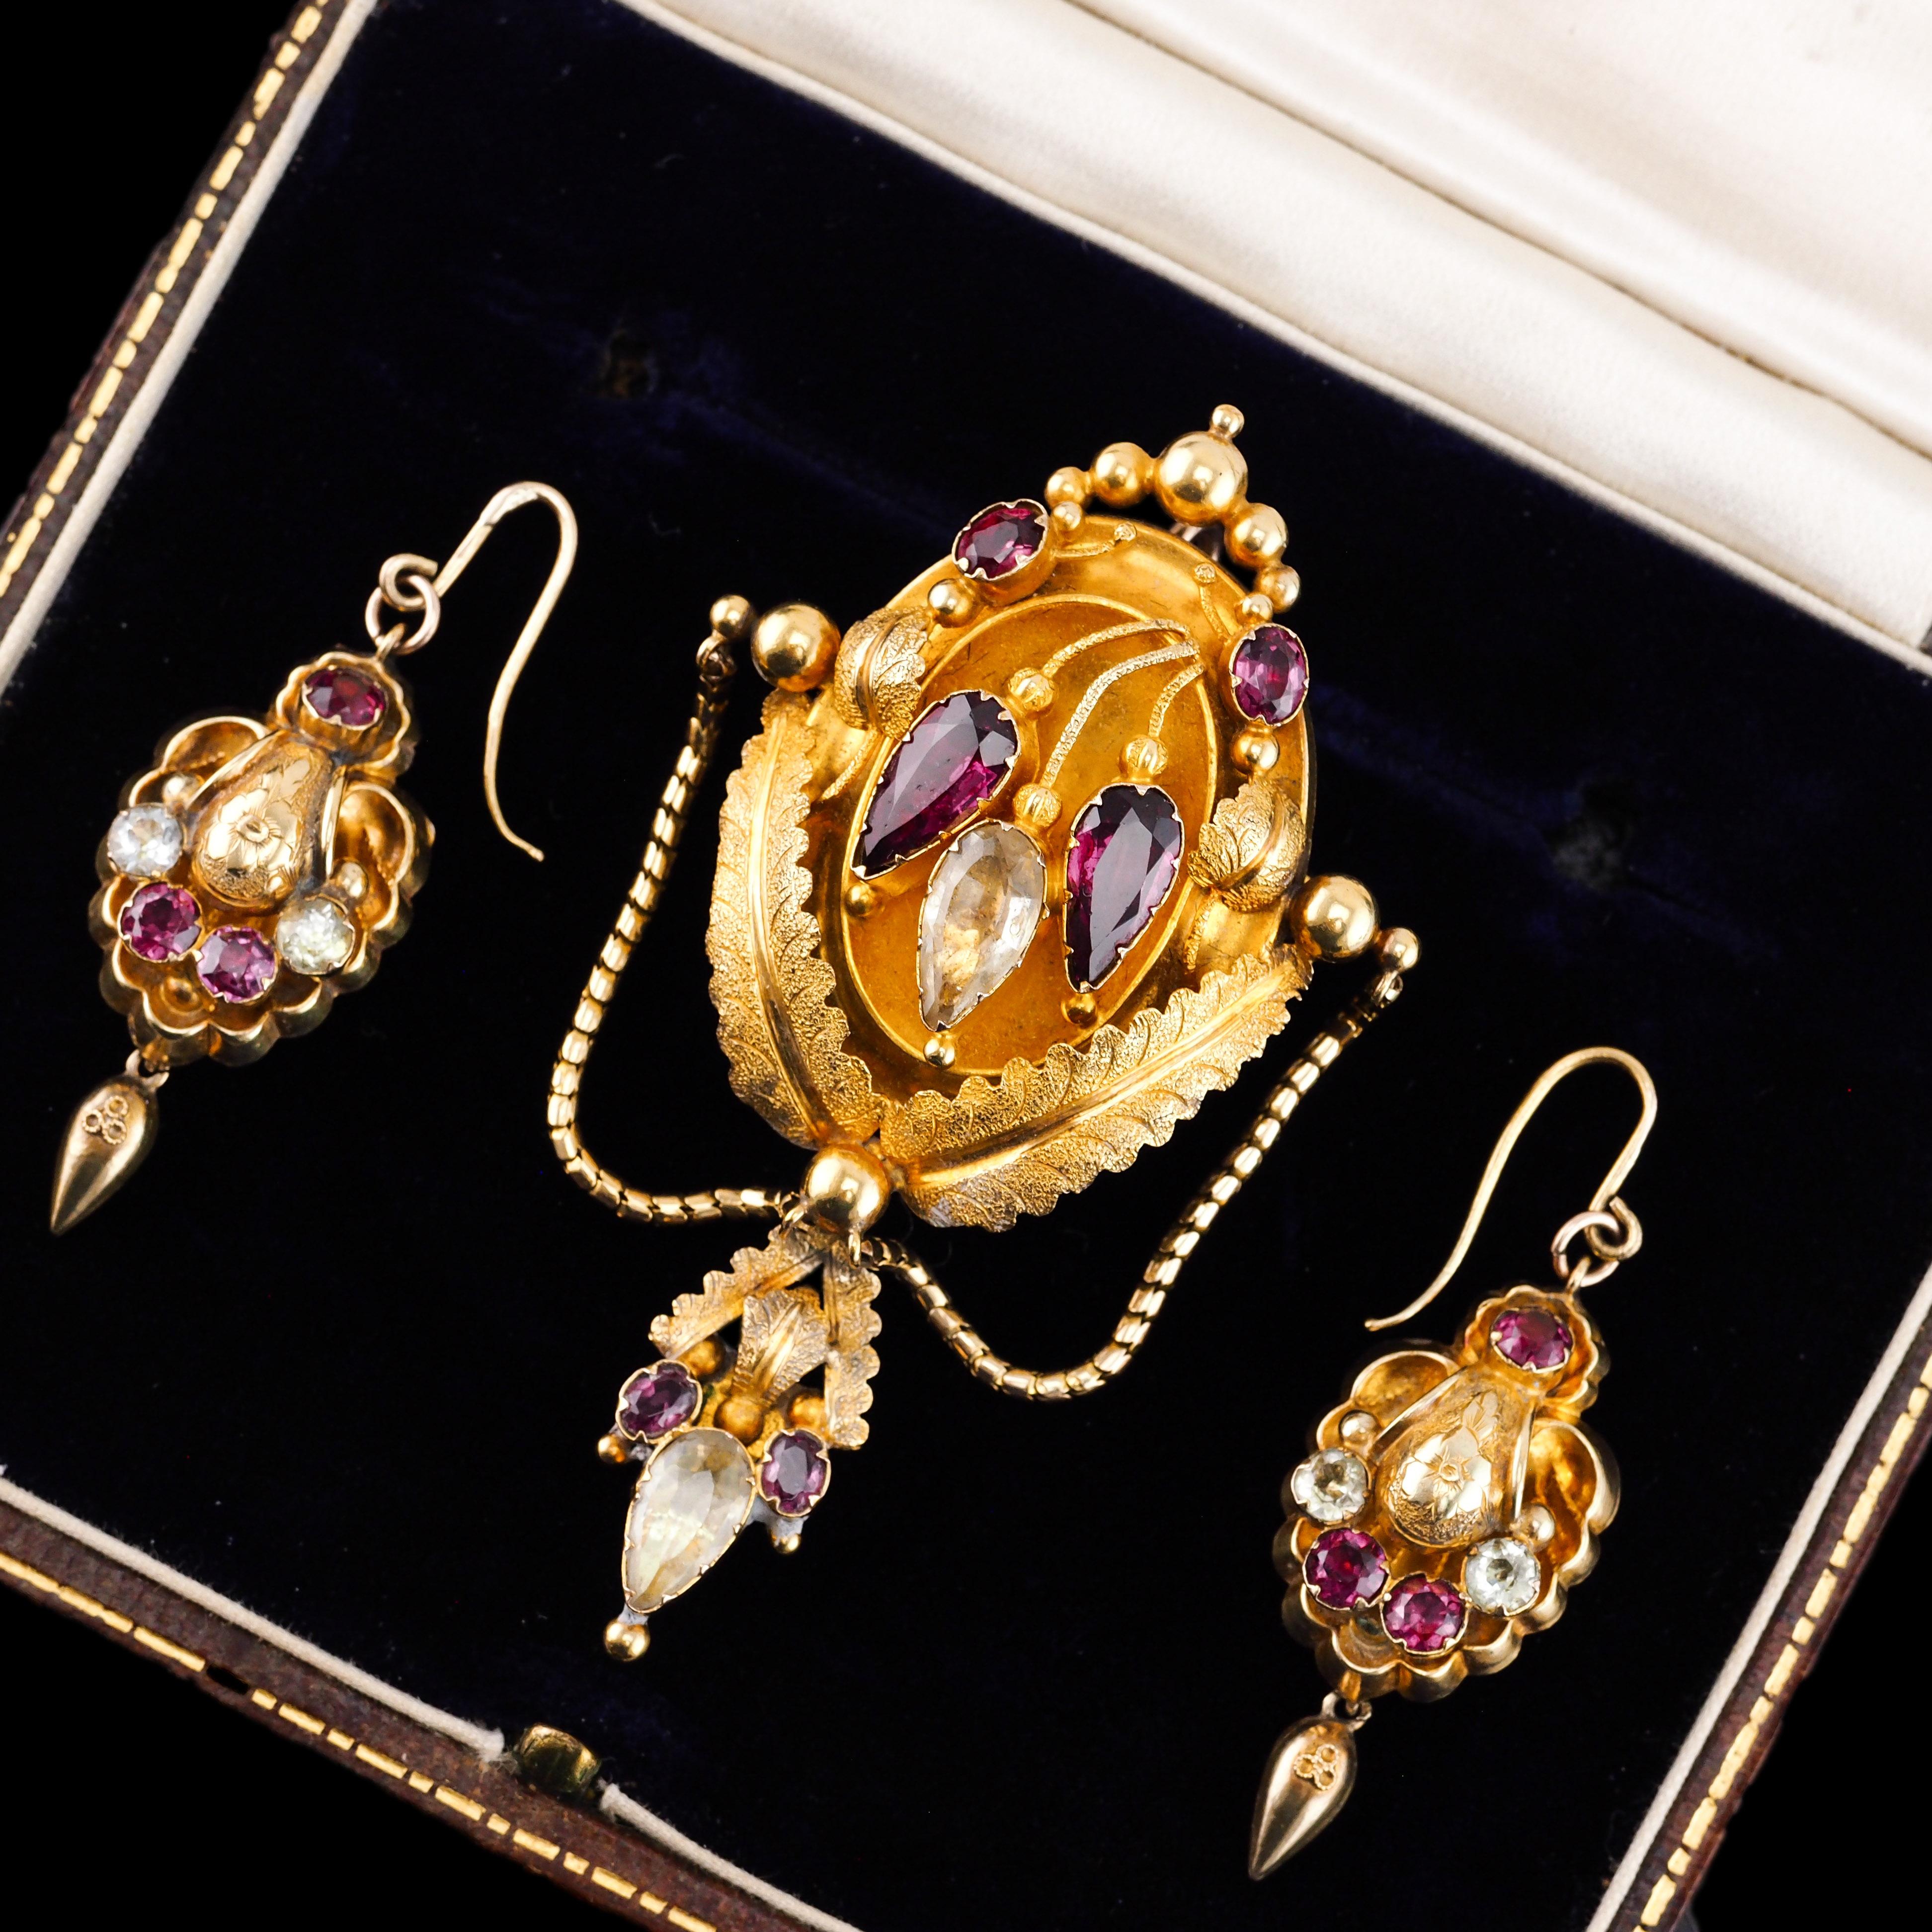 Antique 18K Gold Brooch Pendant & Earrings Garnet & Chrysoberyl - c.1870 In Good Condition For Sale In London, GB